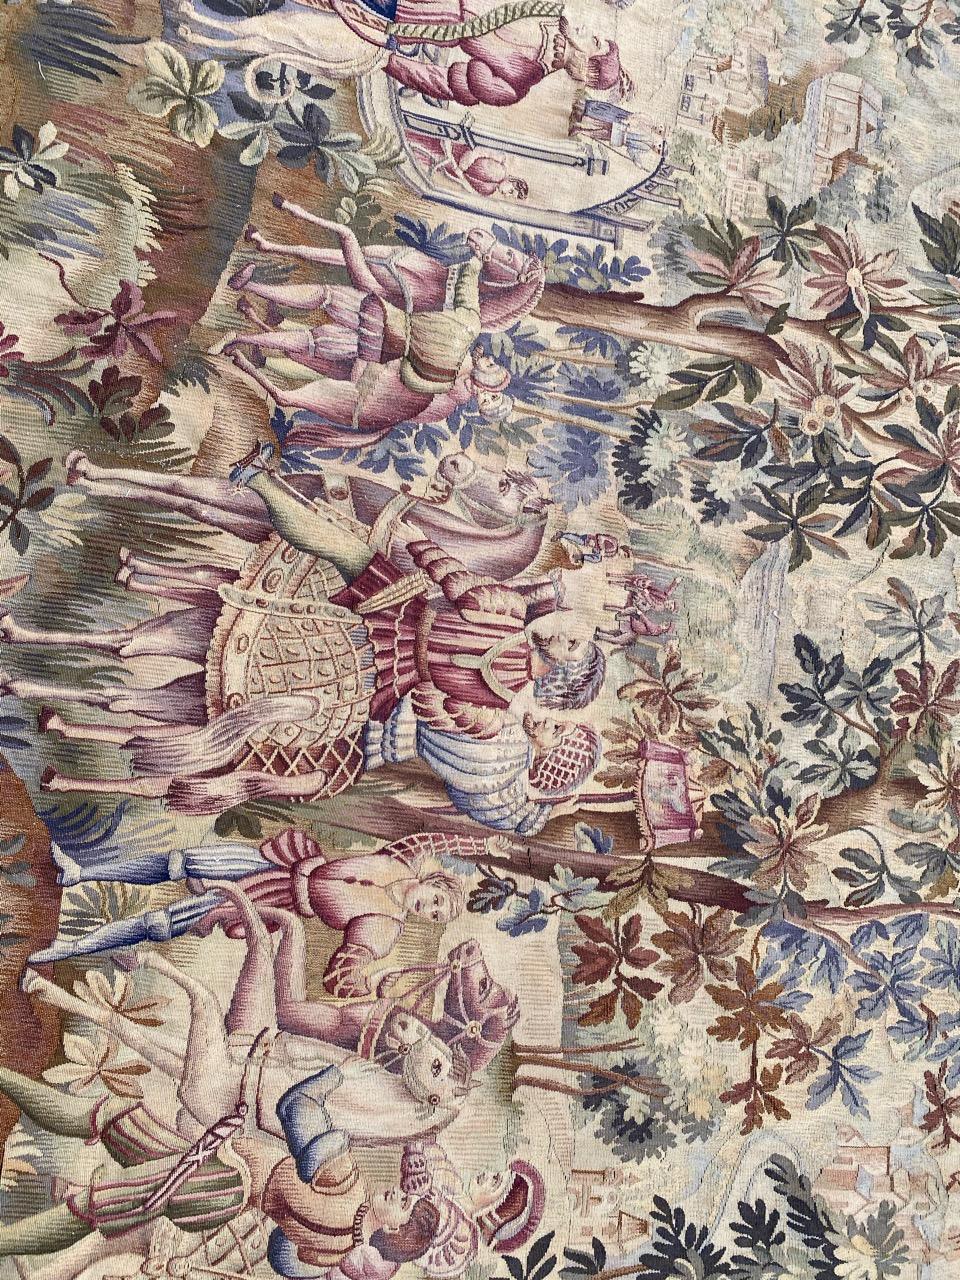 Very beautiful late 19th century French Aubusson tapestry with beautiful design of older tapestries probably with Maximilian historical design, and nice colors, entirely handwoven with wool and silk on cotton foundation.

✨✨✨
